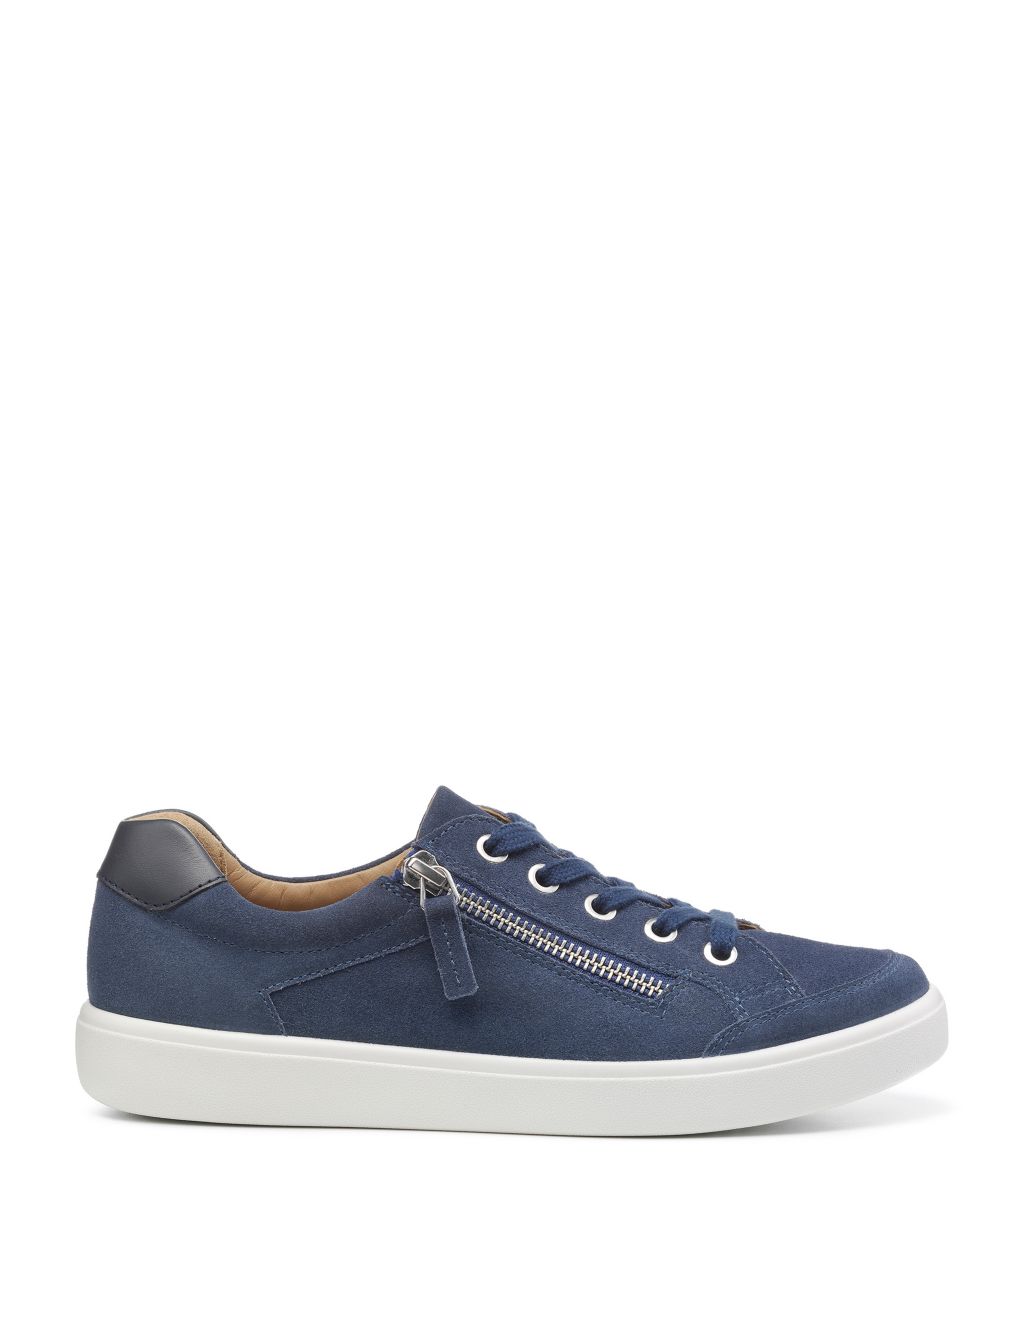 Chase Extra Wide Fit Leather Trainers image 1